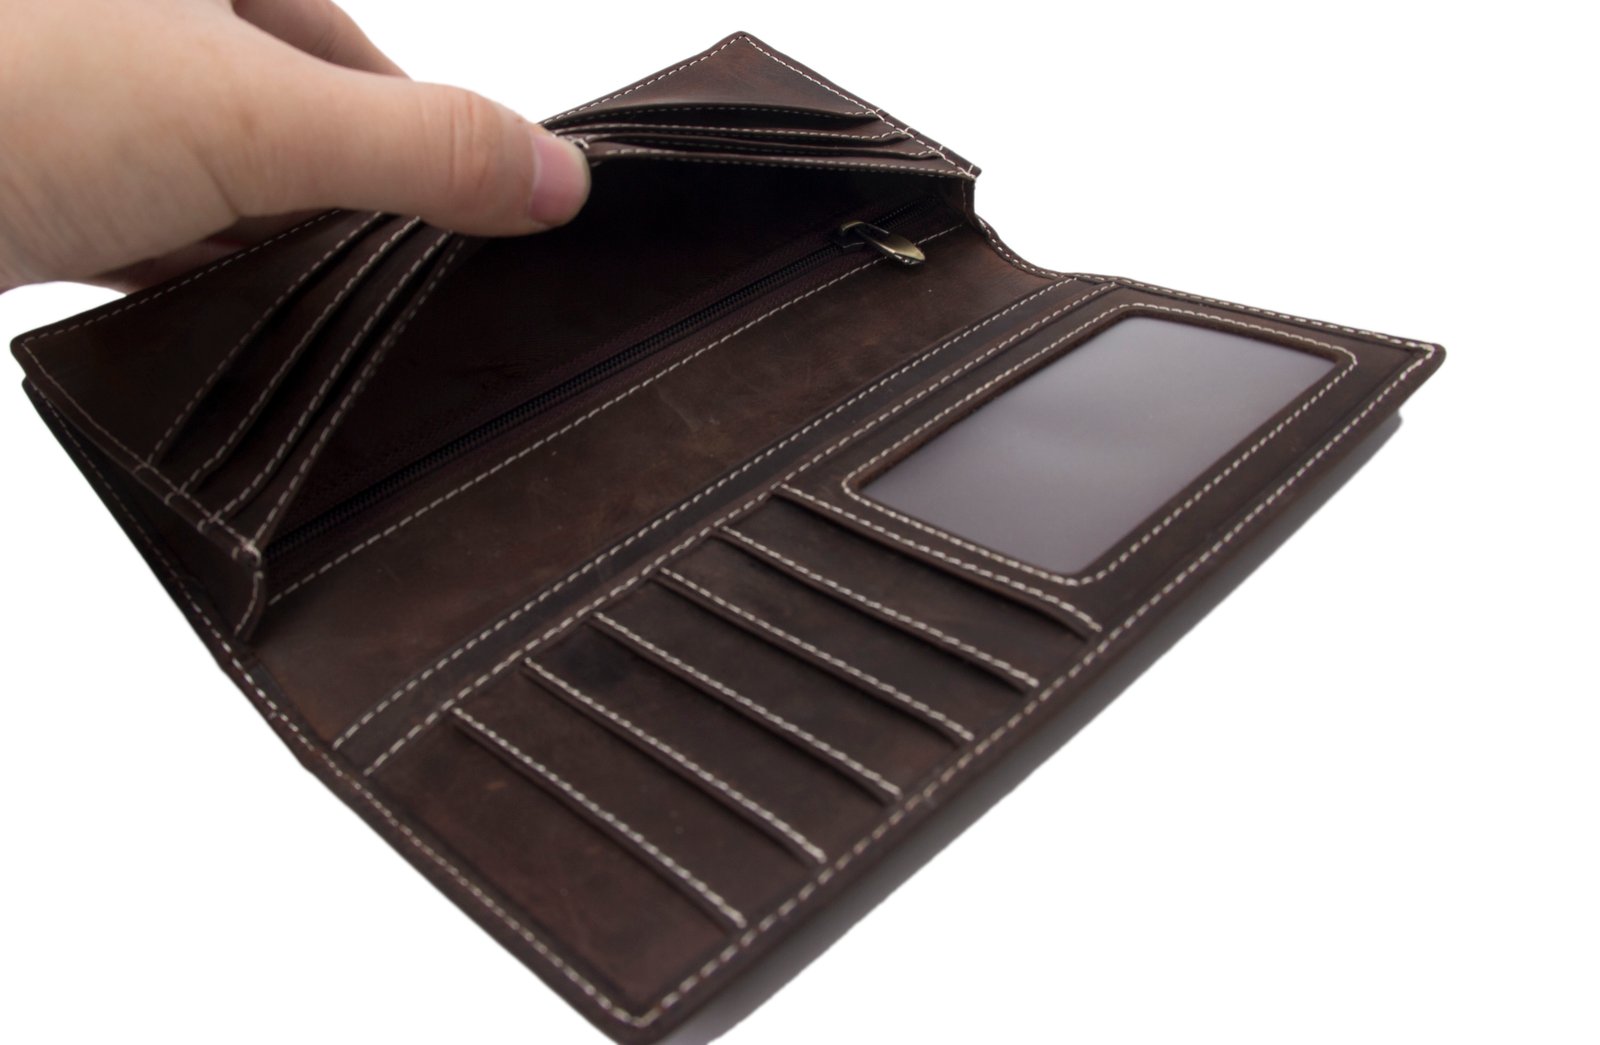 Vintage Mens Wallet With No Zipper Business Case, Bank Card Holder, Money  Clip, Ticket Holder And Mens Leather Money Purse From Kovichh, $9.51 |  DHgate.Com